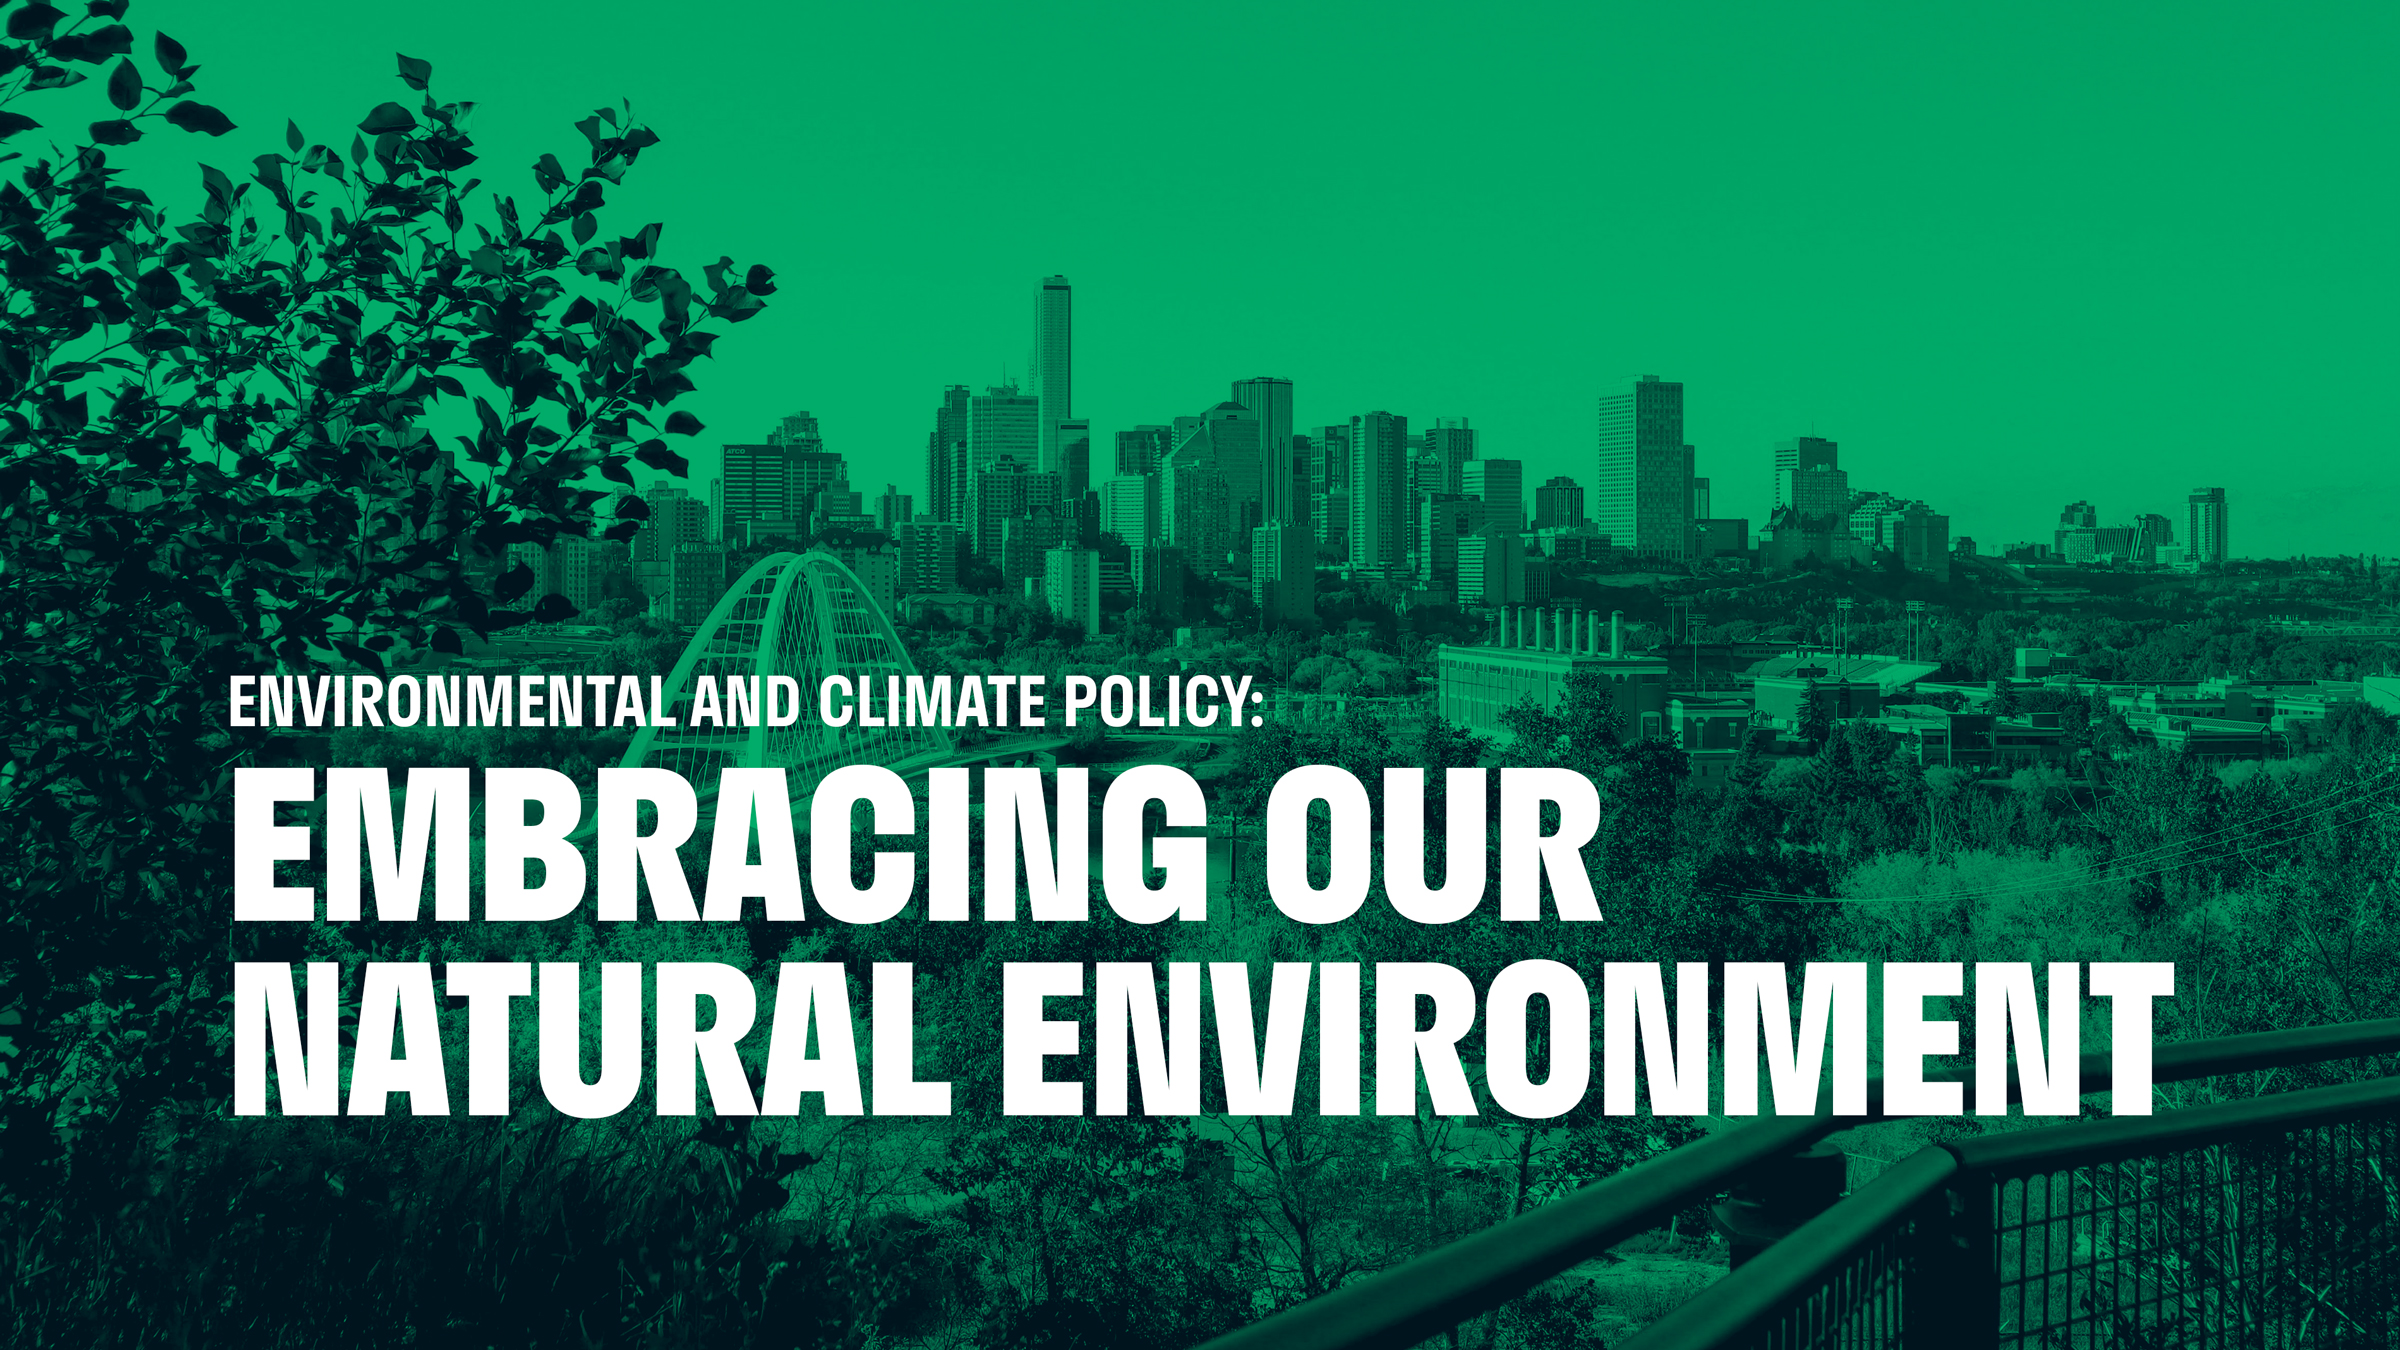 An image of the walterdale bridge in the edmonton river valley. The text overlay reads: "environmental and climate policy: embracing our natural environment"